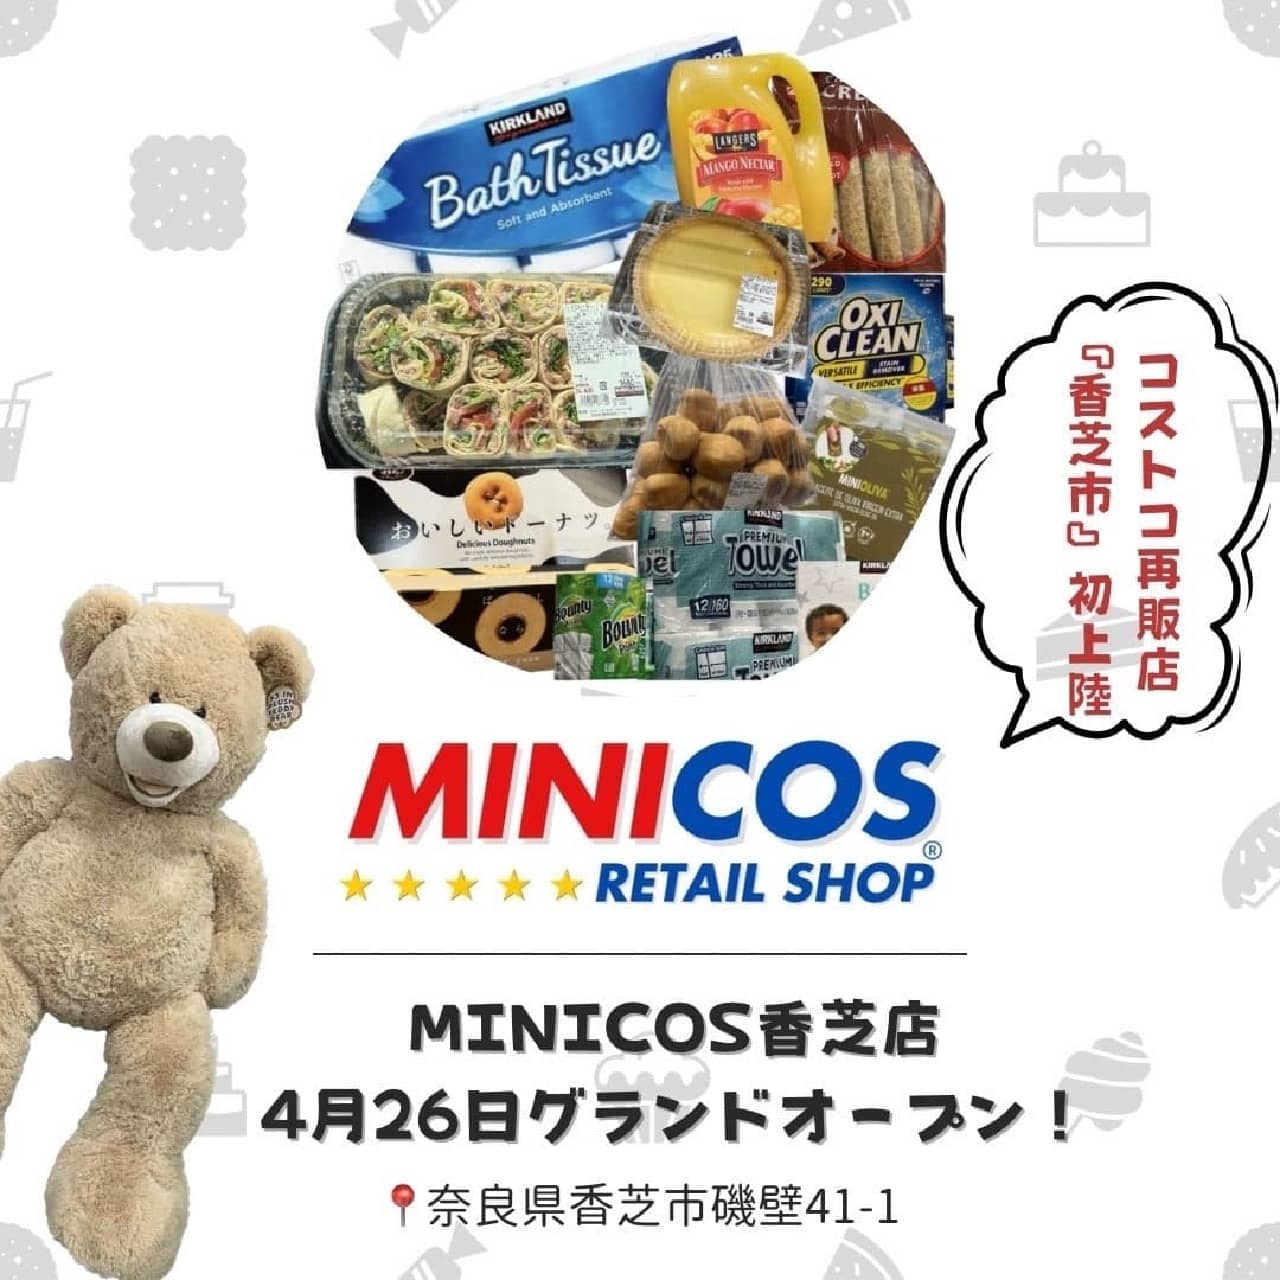 A new shopping spot opened in Kashiba City, Nara Prefecture! MINICOS" is the first Costco reseller in the area, offering many popular products in small packages Image 1